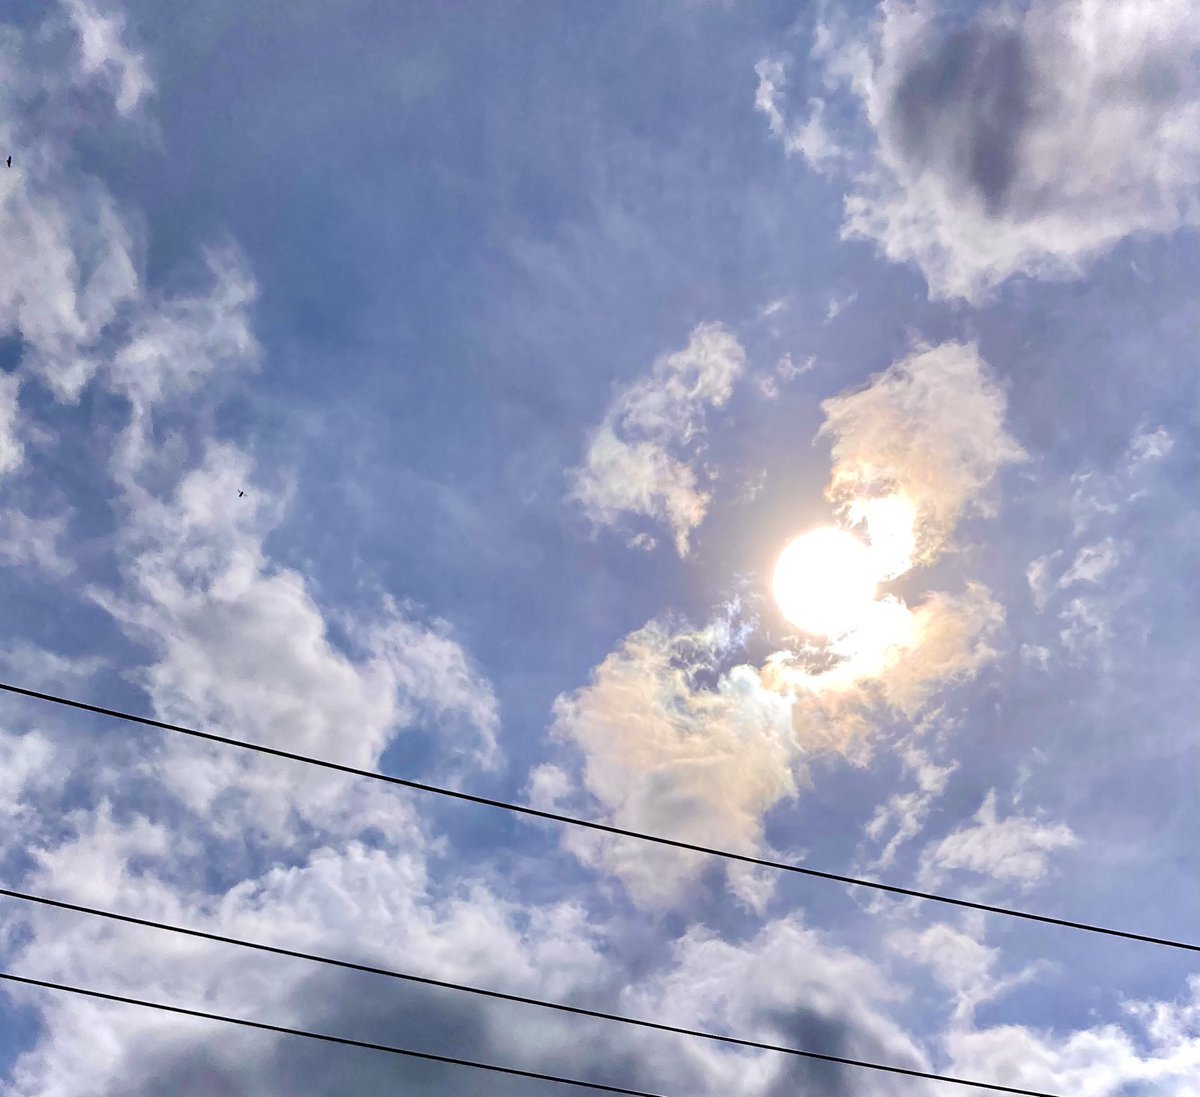 #NaturePhotography
#Naturephotography
#photography #Photography 
#nature #naturelovers
#bluesky #sky #sunrays #Monday 
#cottoncandyclouds #outside #seasons 
#May #naturesbeauty #telephonewire
#Spring #sun #suncolors #clouds